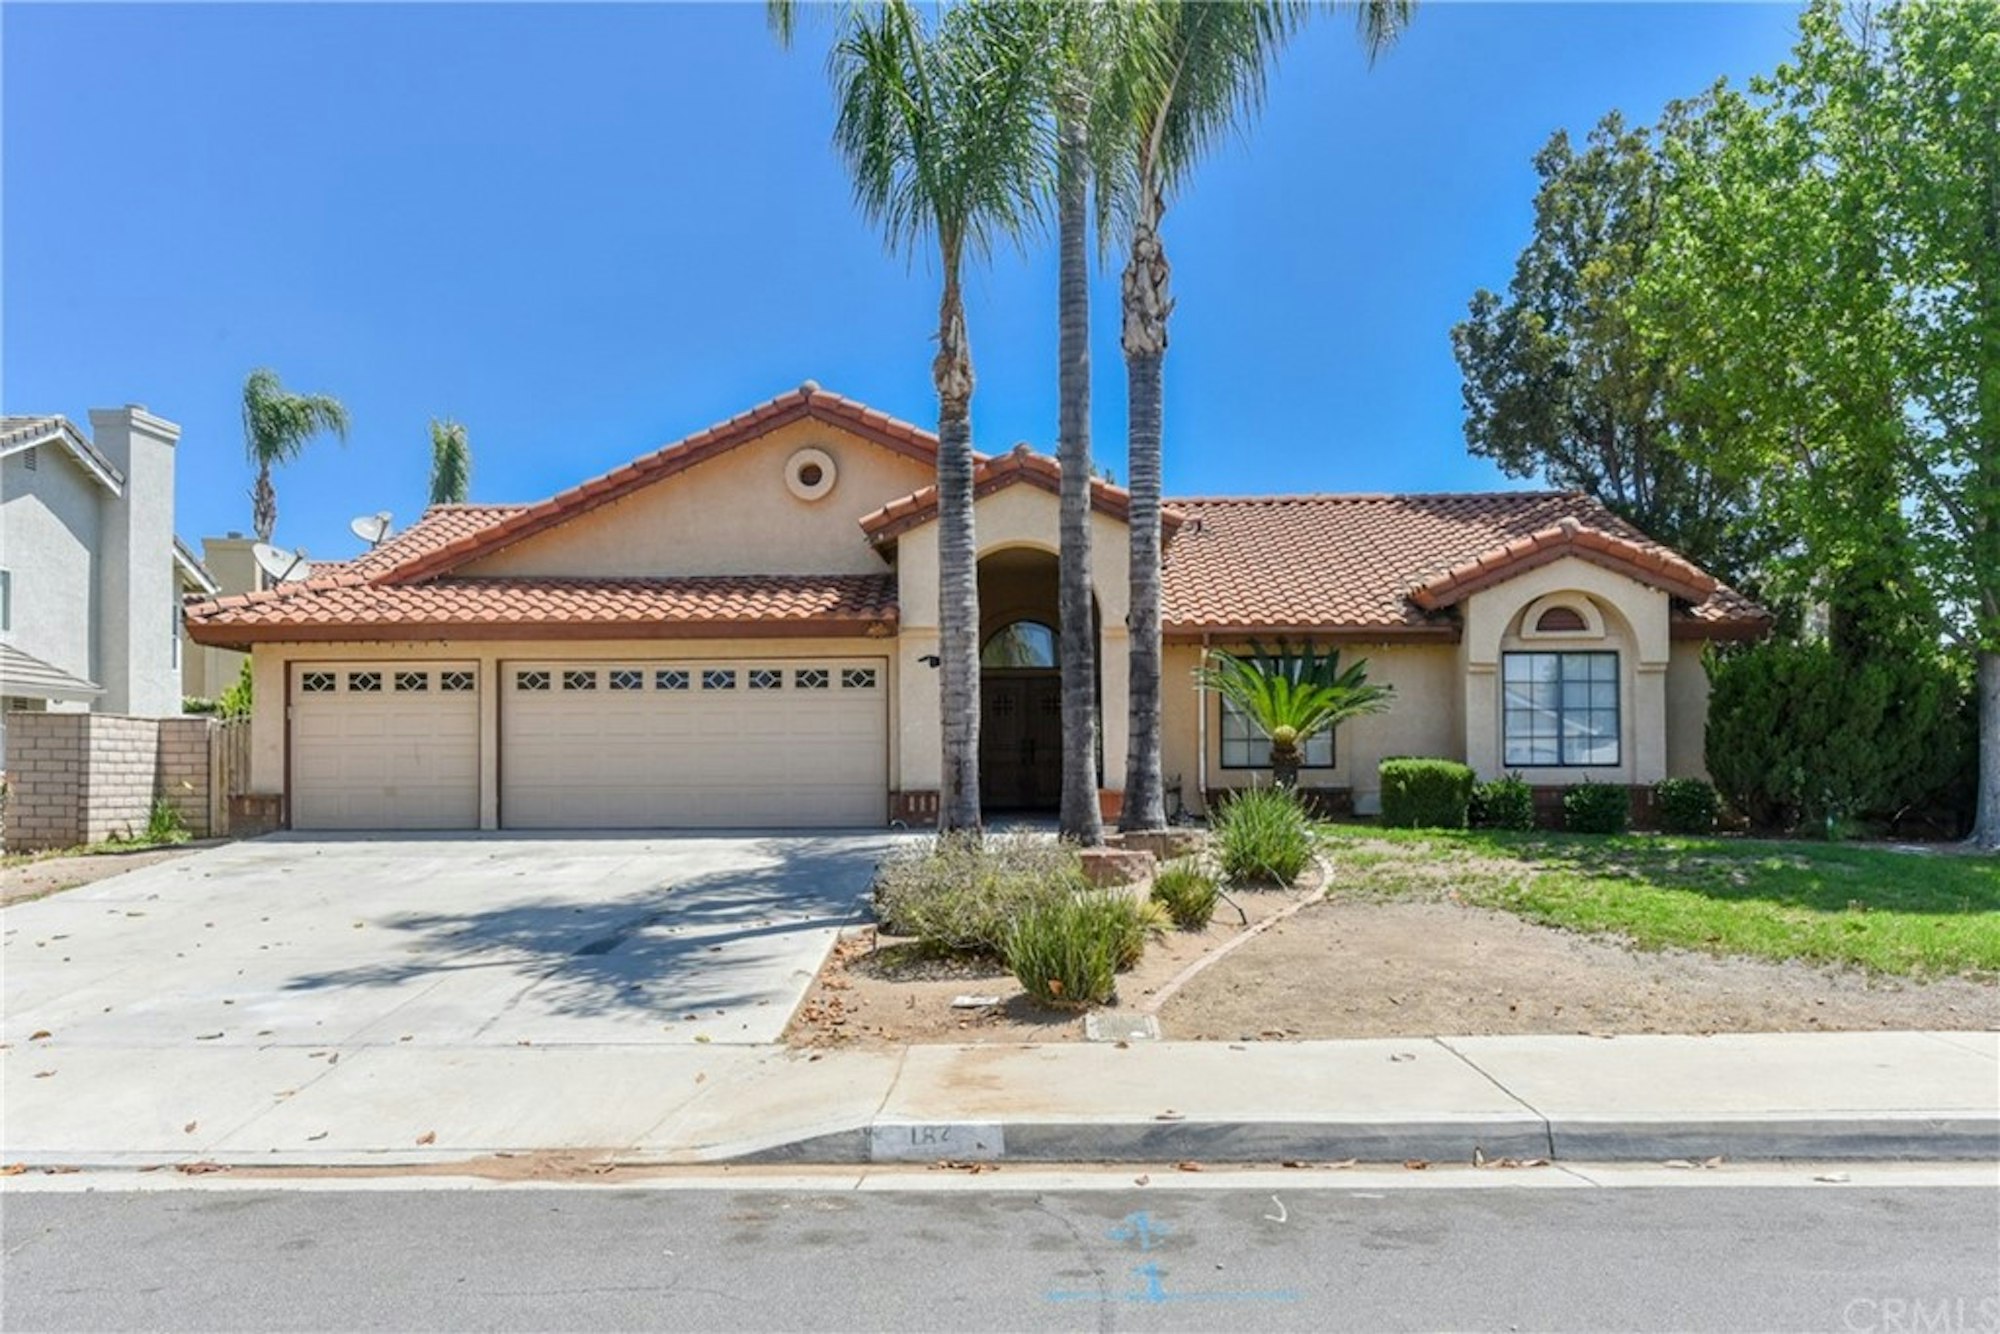 Photo 1 of 46 - 184 Cannon Rd, Riverside, CA 92506